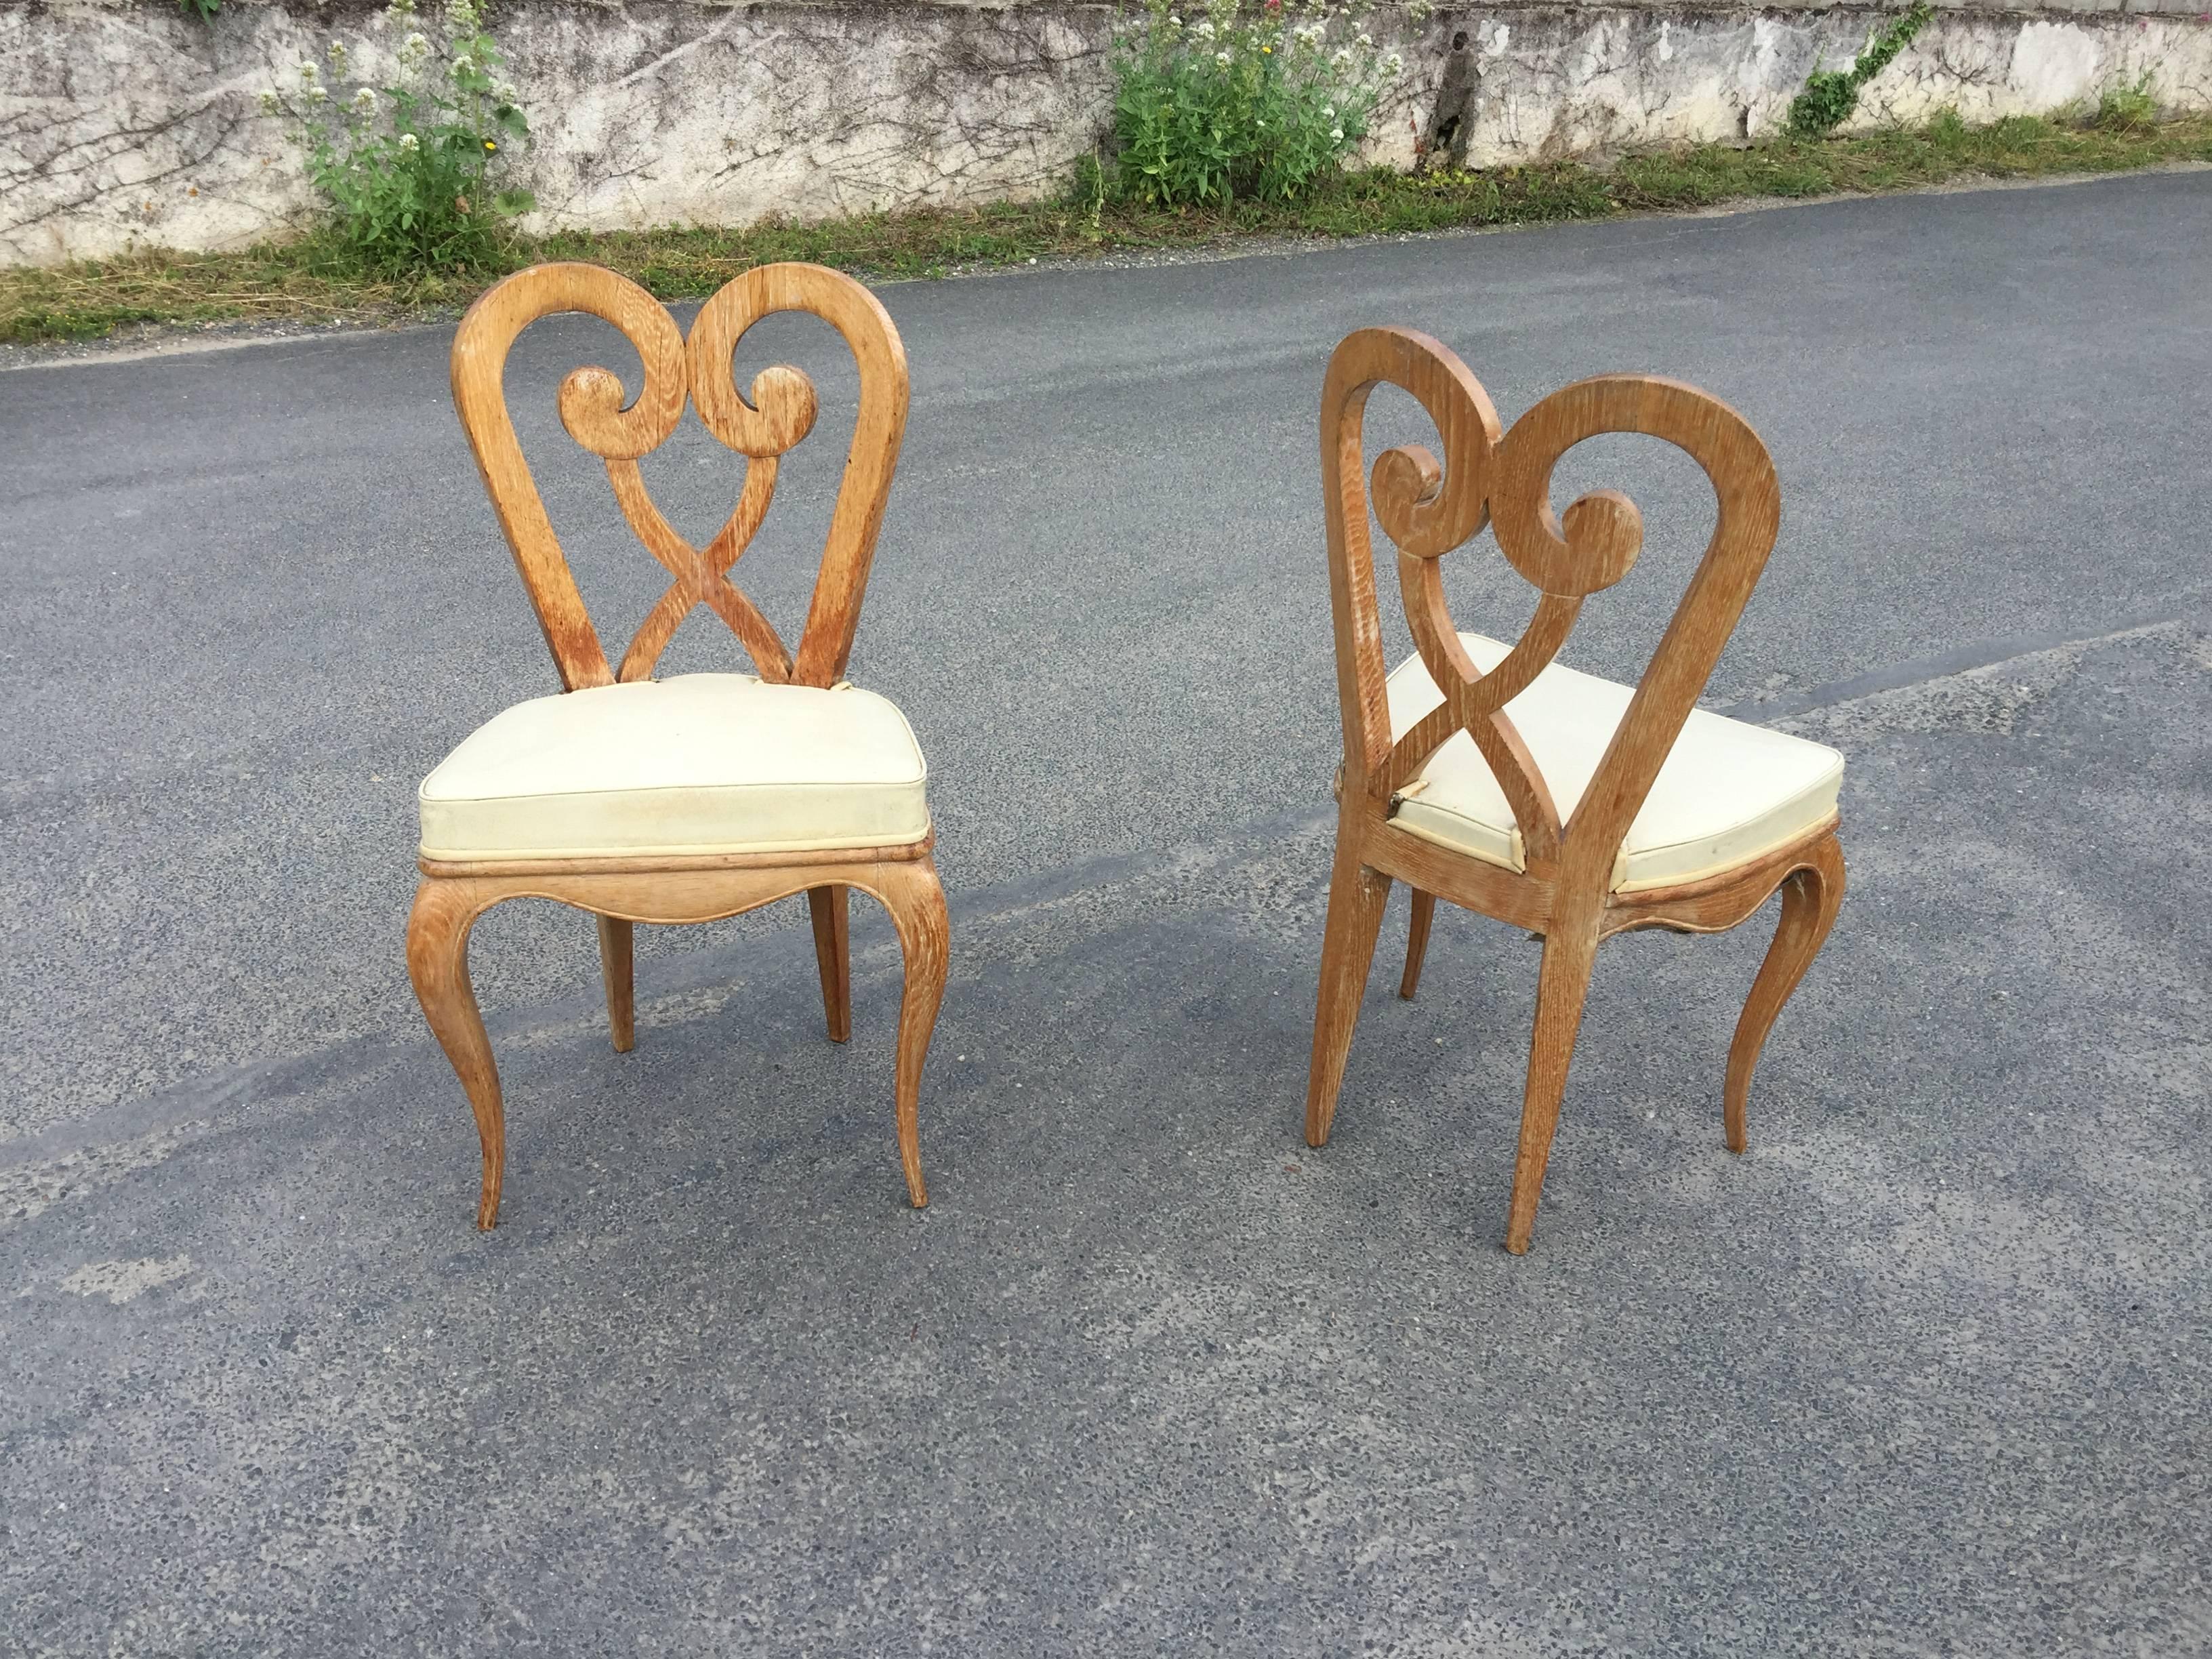 Mid-20th Century Germaine Darbois-Gaudin, Set of Six Art Deco Chairs, circa 1940 For Sale